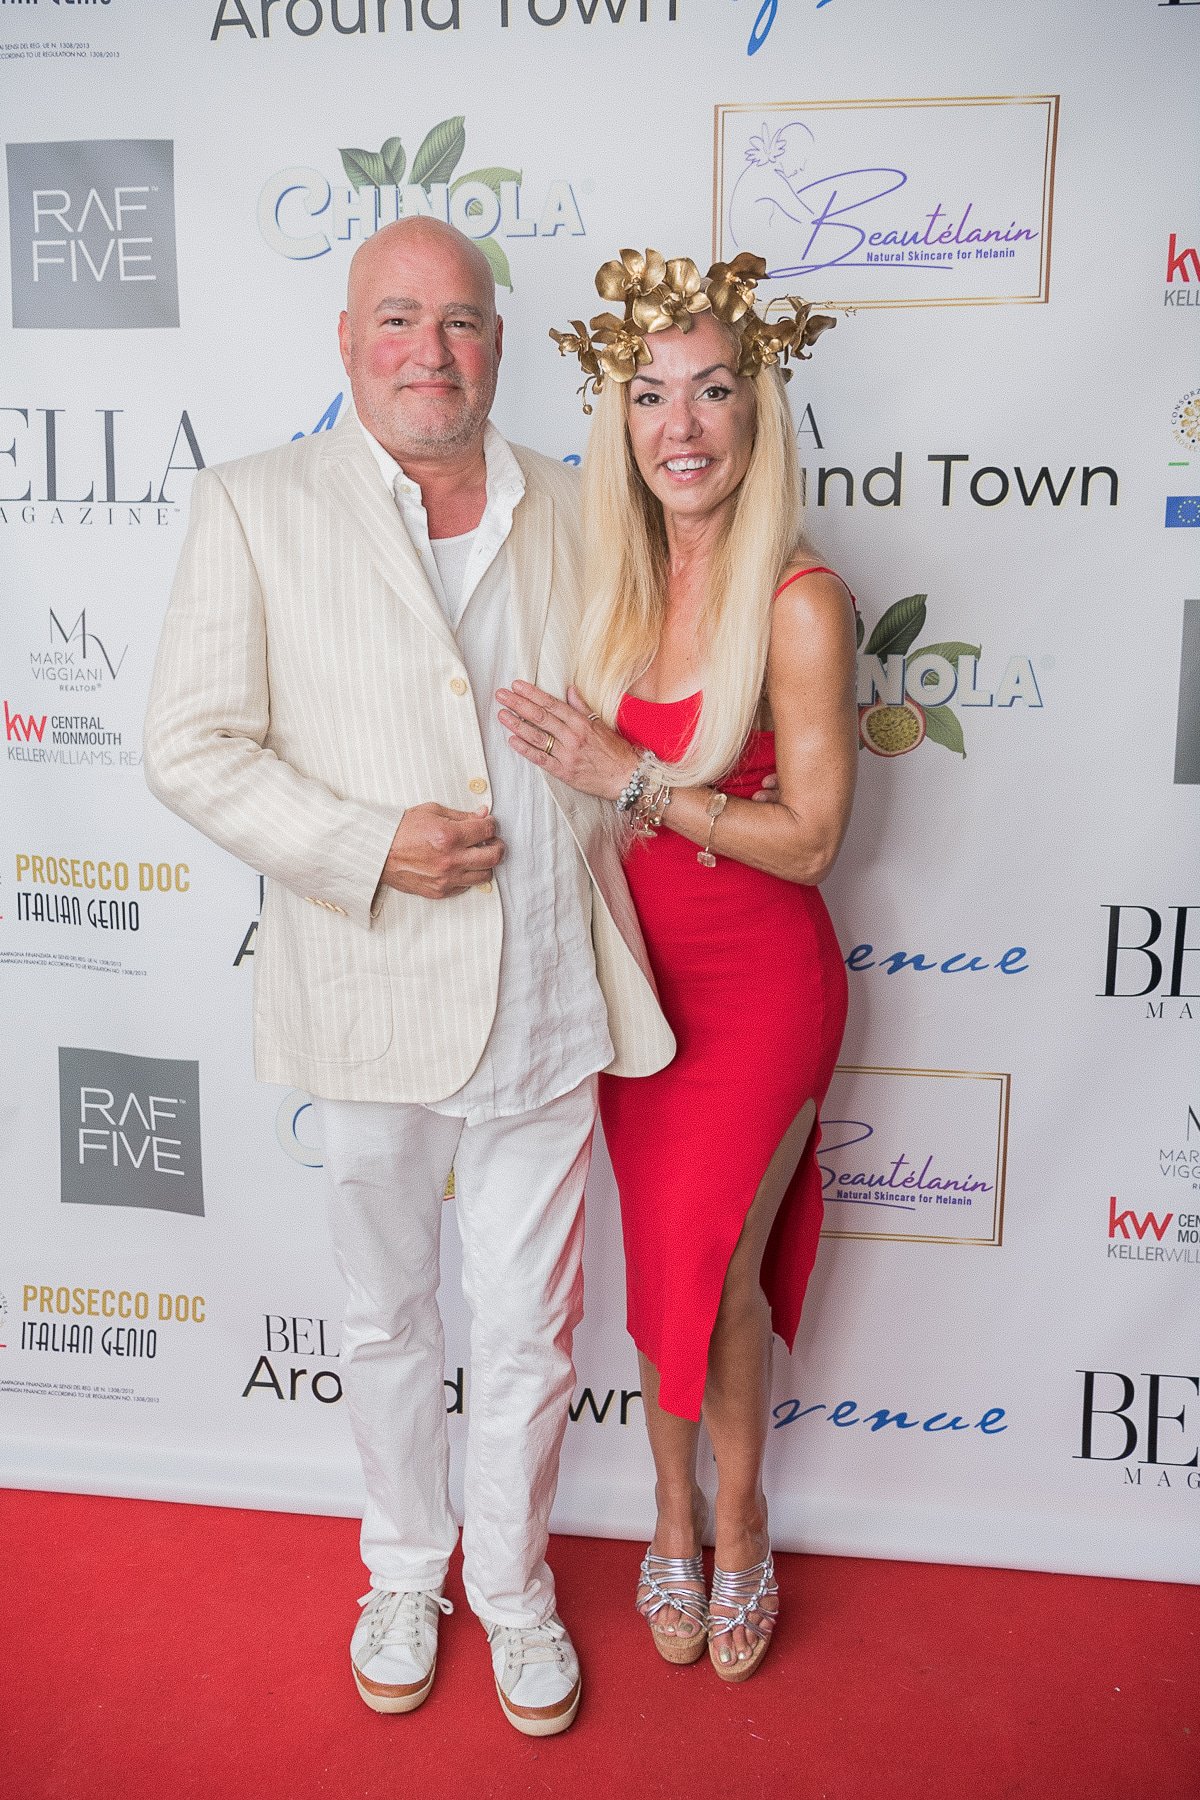 BELLA-MAGAZINE-Summer-Issue-Cover-Party-Avenue-Long-Branch-91.jpg